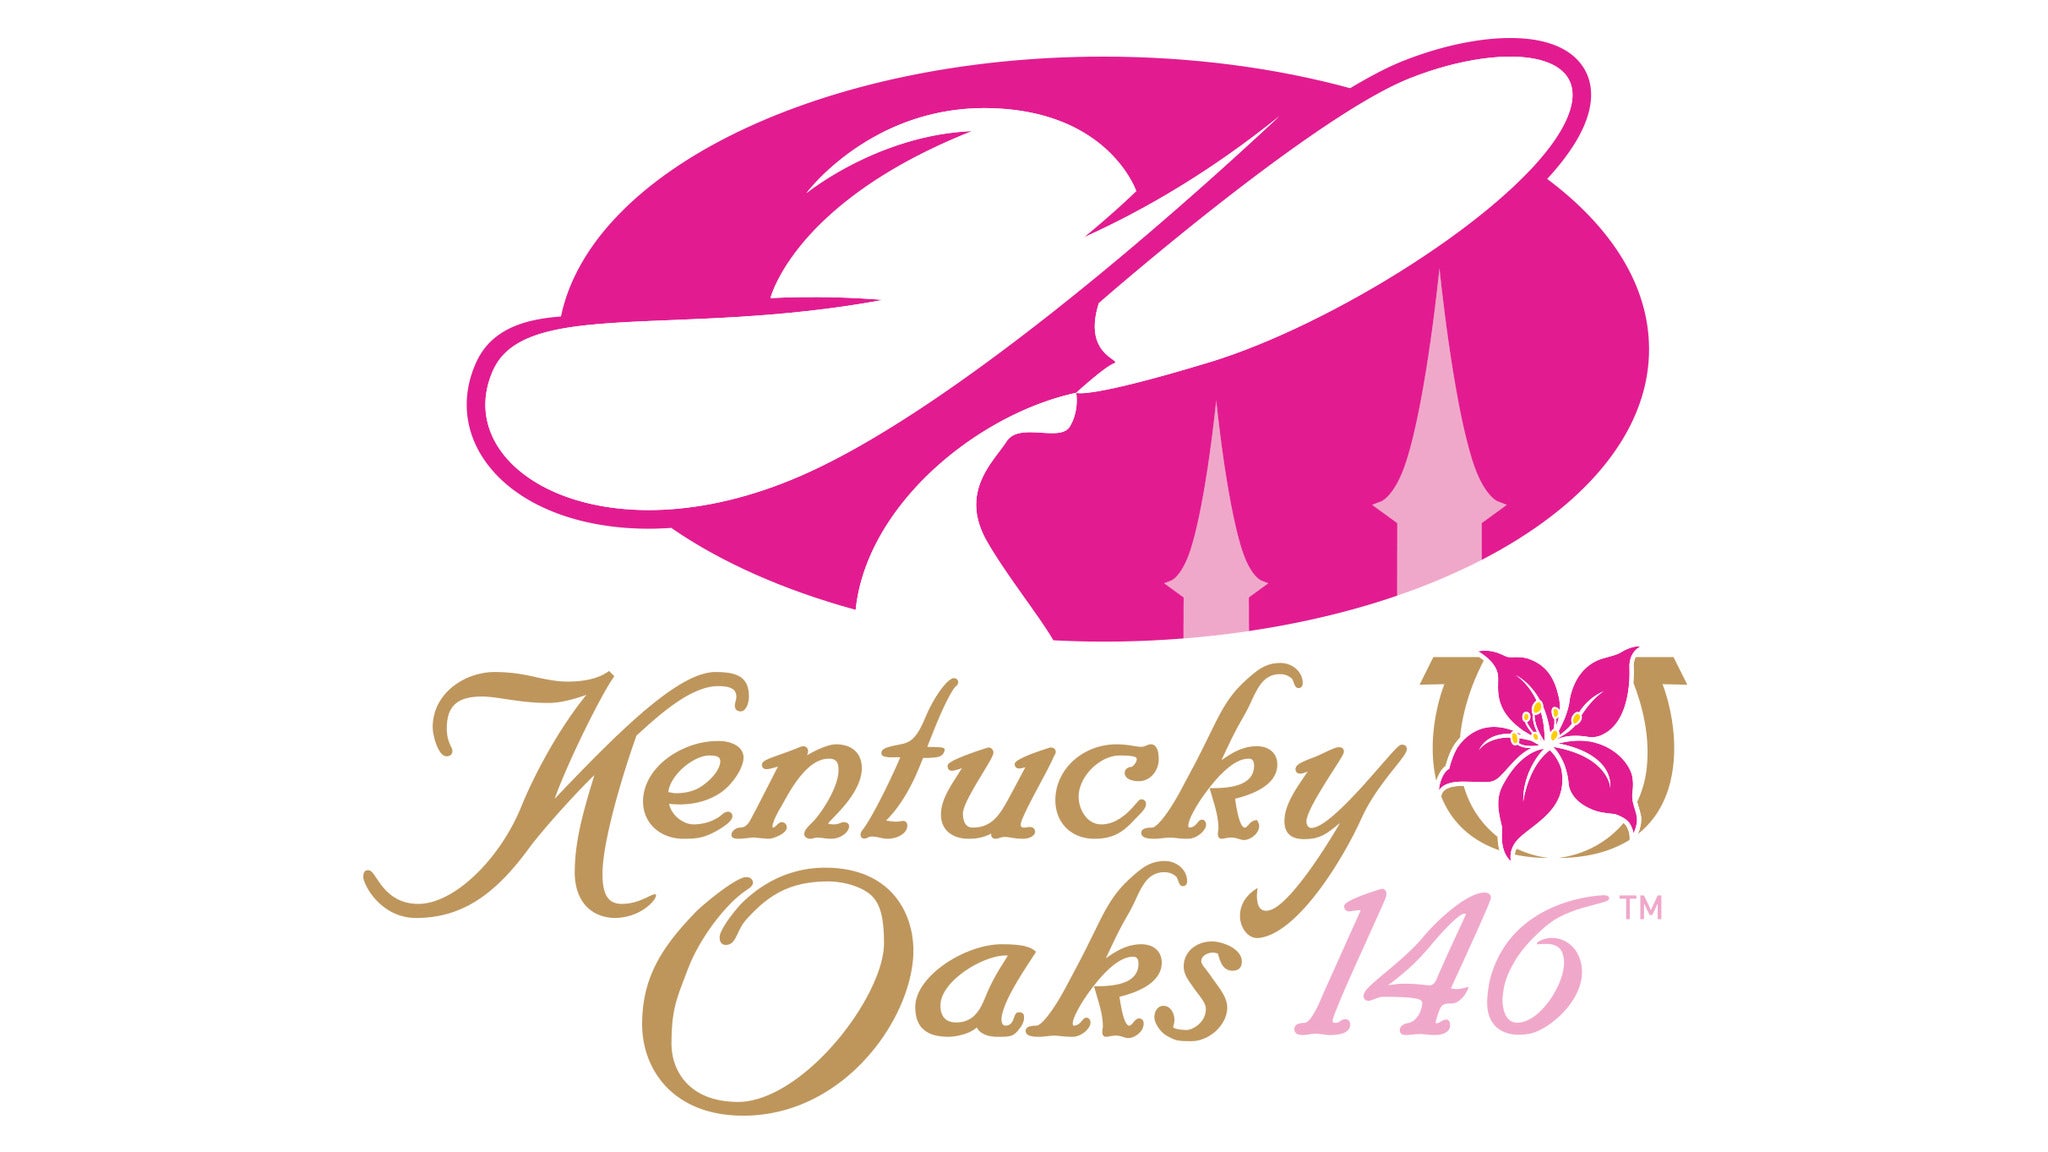 143rd Kentucky Oaks - Infield & Paddock General Admission Single Day in Louisville promo photo for Advance Purchase Pricing presale offer code